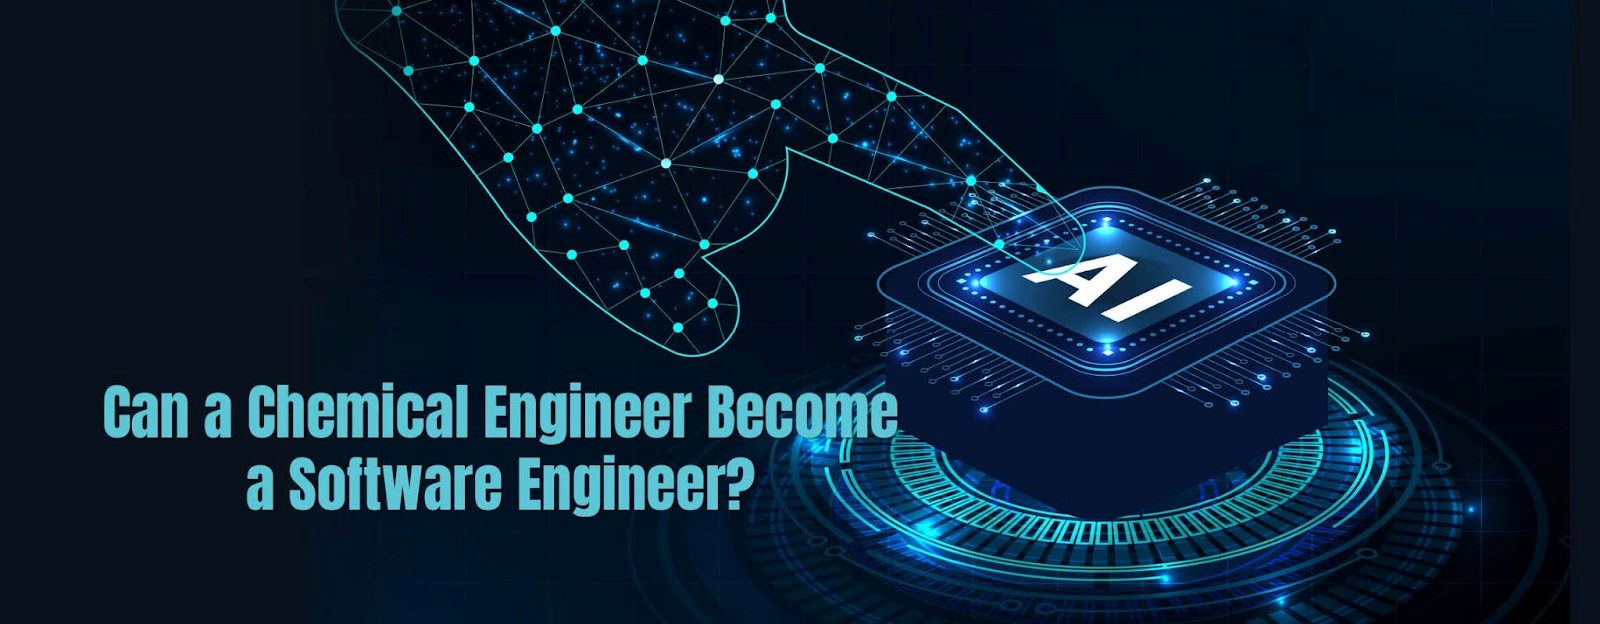 can a chemical engineer become a software engineer